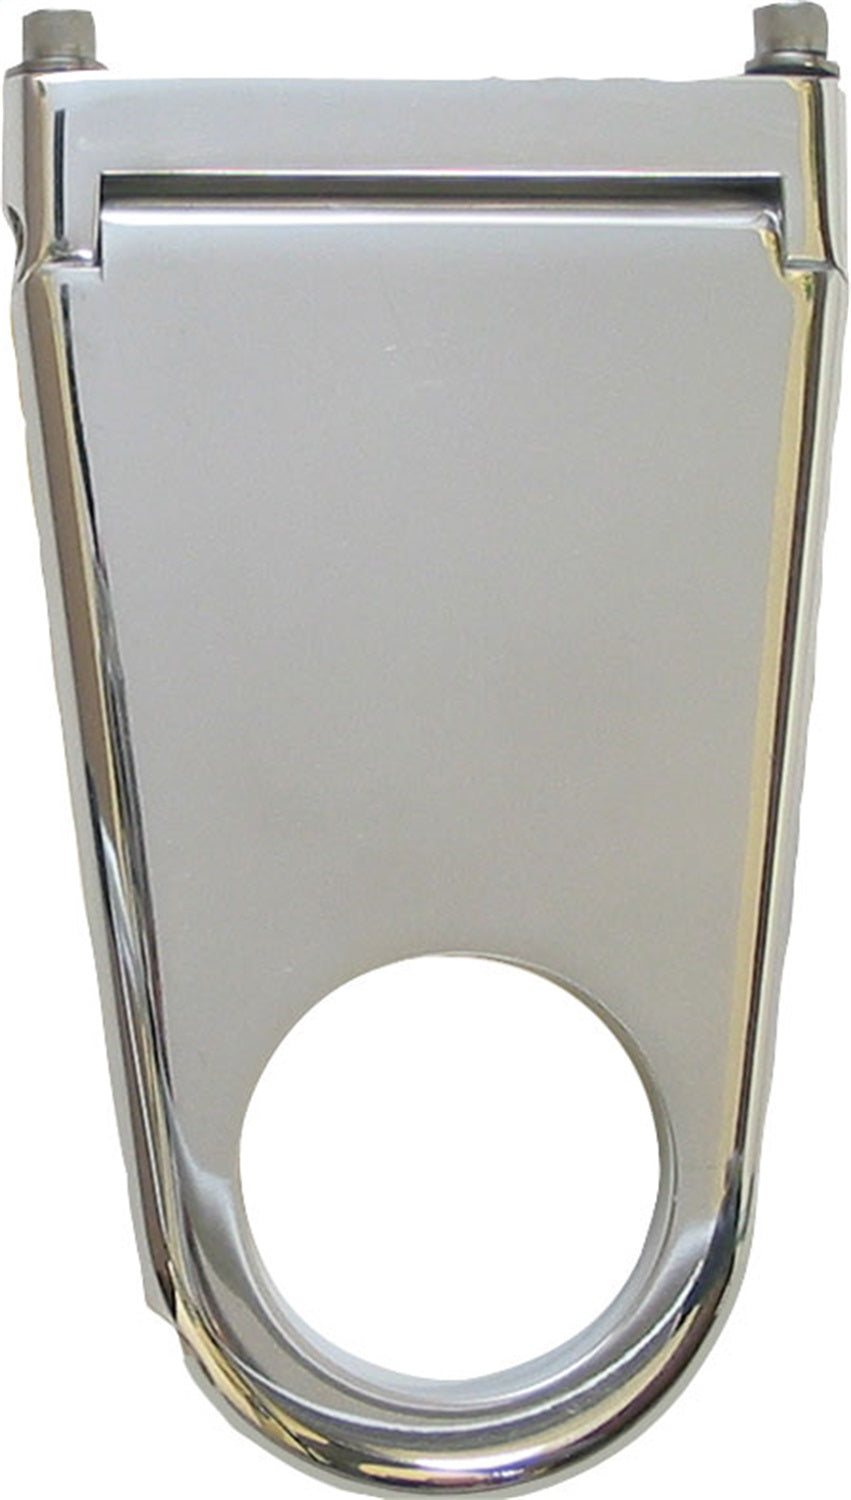 Borgeson Column Drop Blank Style 2-1/4in. Column X 2in. Drop Polished Aluminum 911222